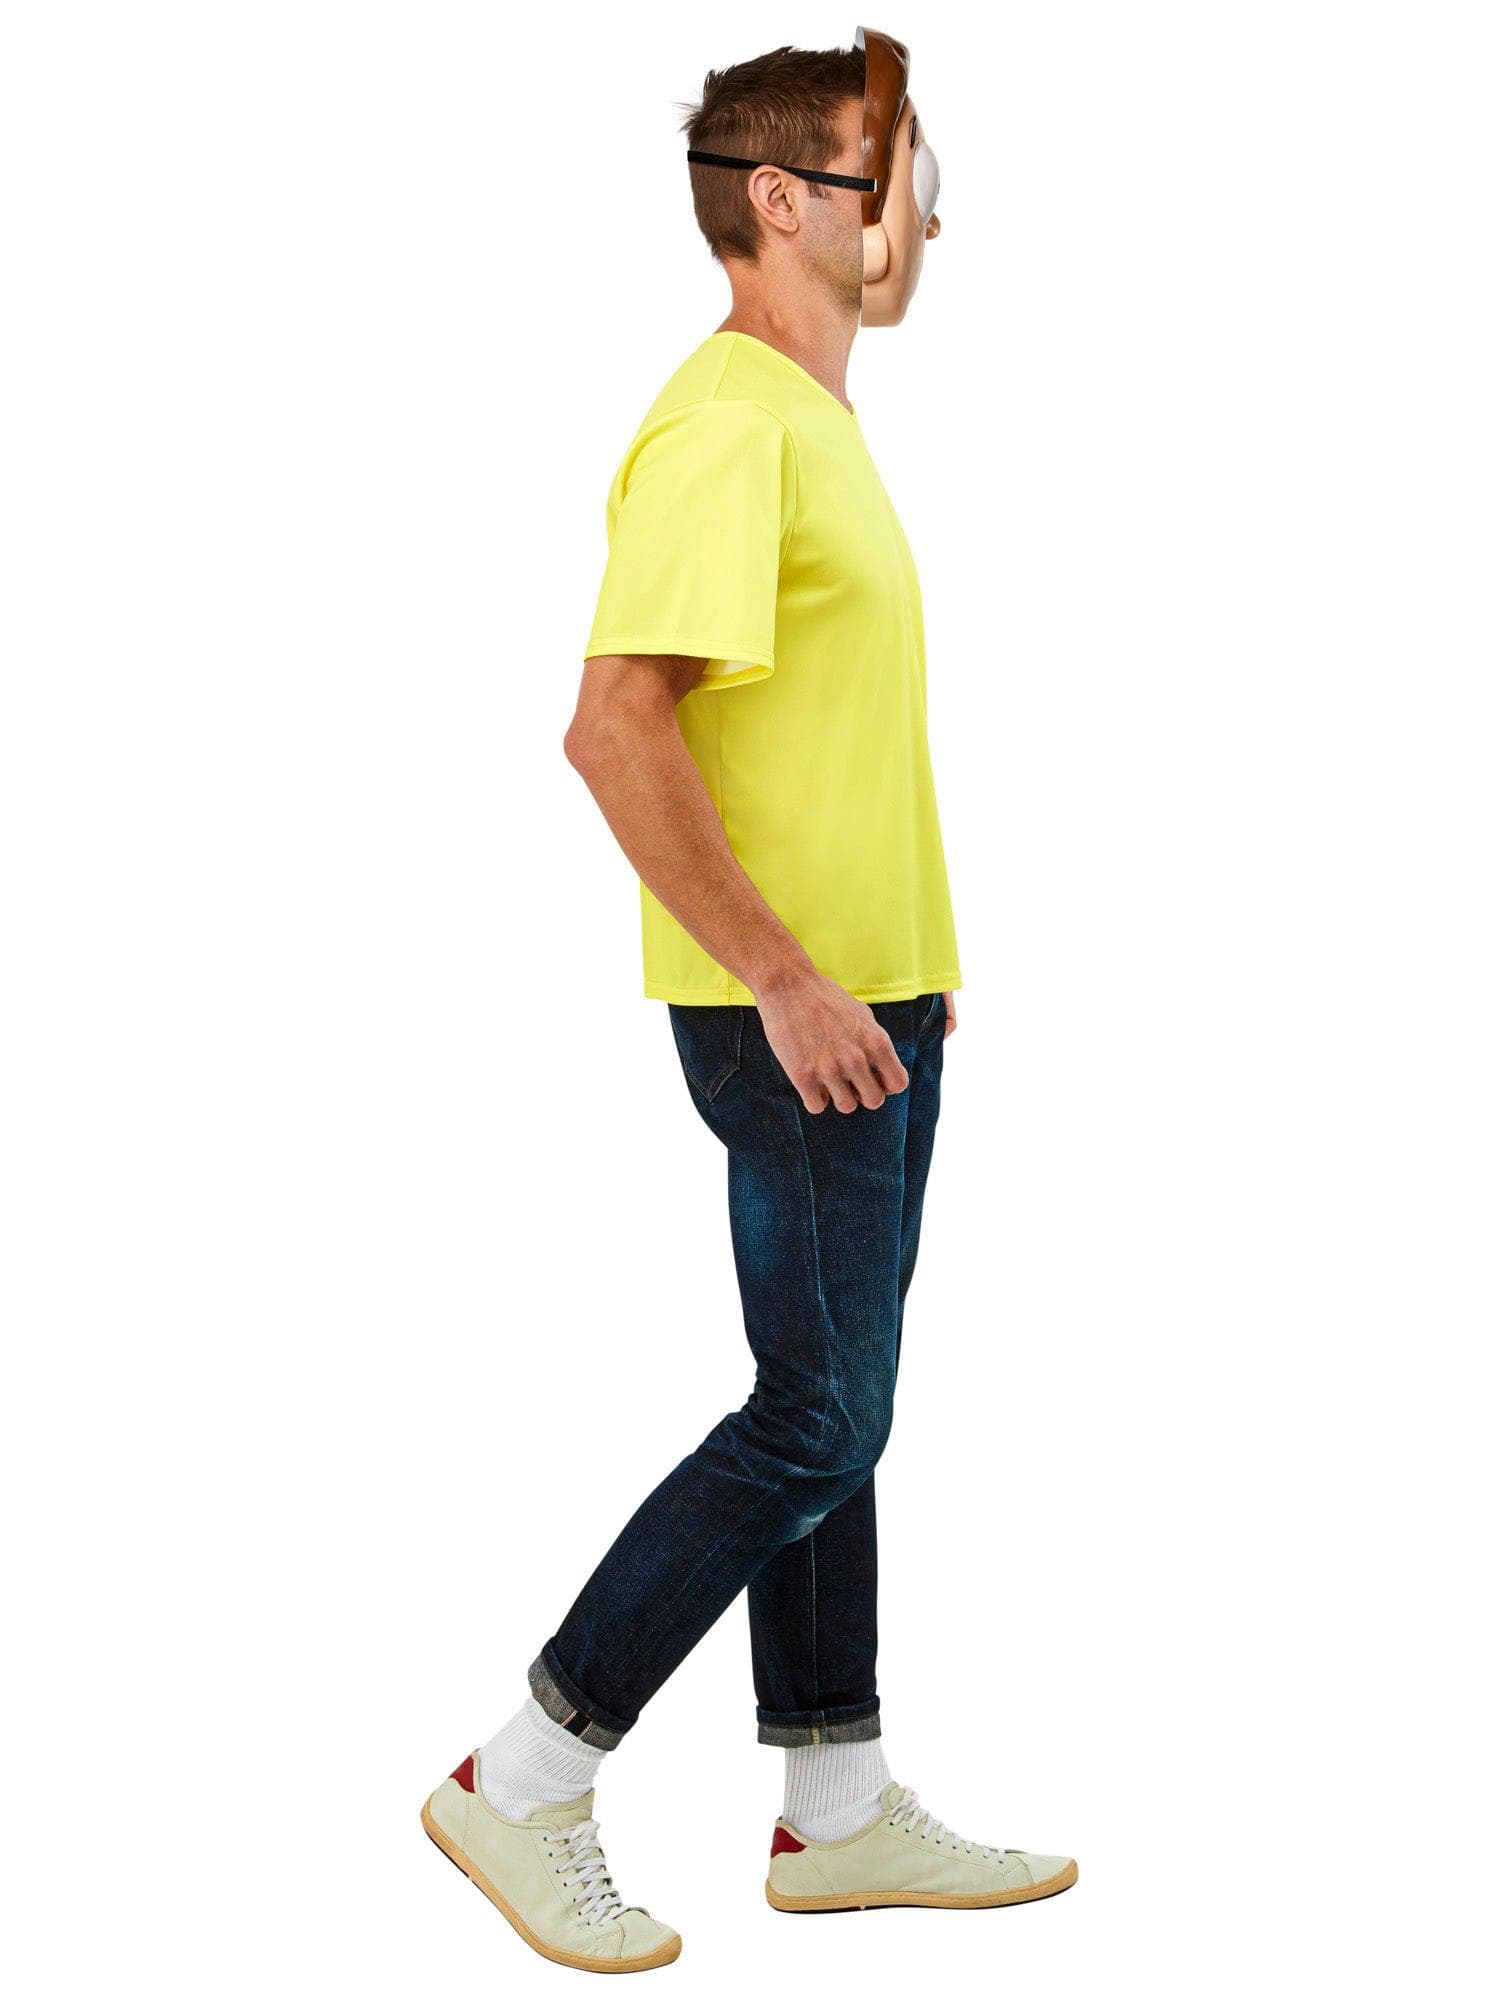 Rick and Morty Adult Morty Costume - costumes.com